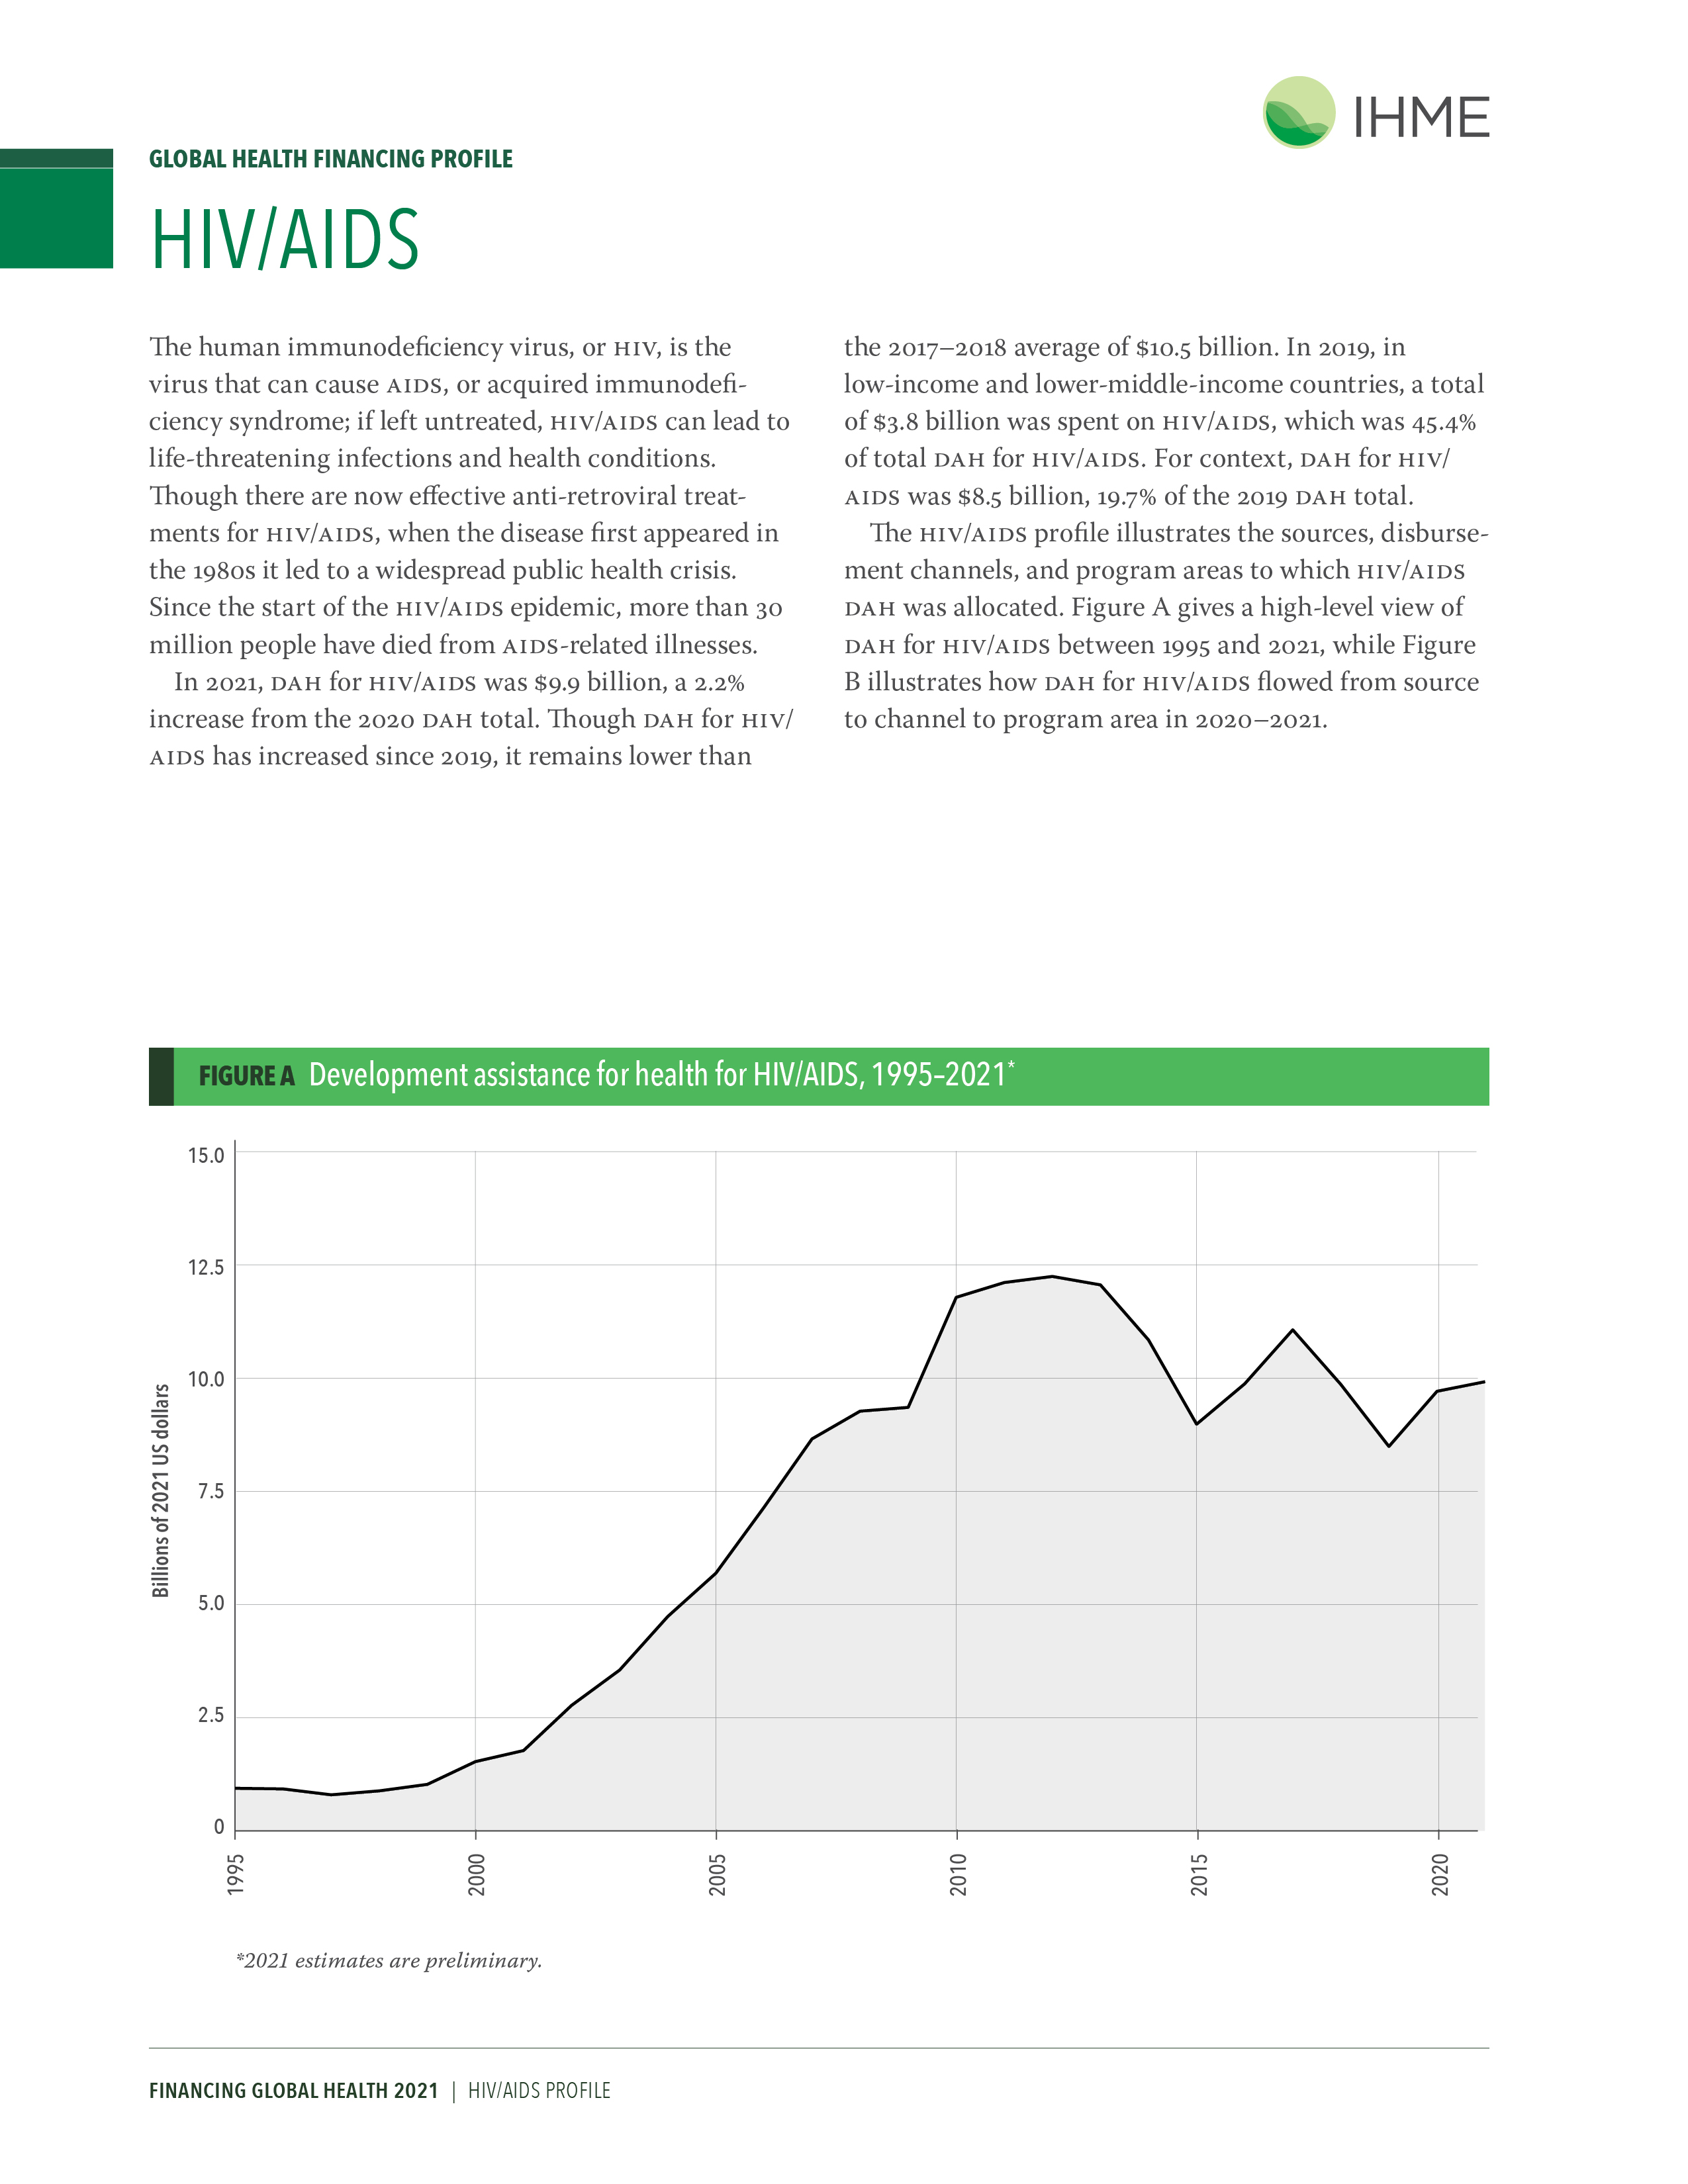 Disease spending profile for HIV/AIDS: page 1 provides an overview of the disease and chart of development assistance for health. Download the profile for additional details.